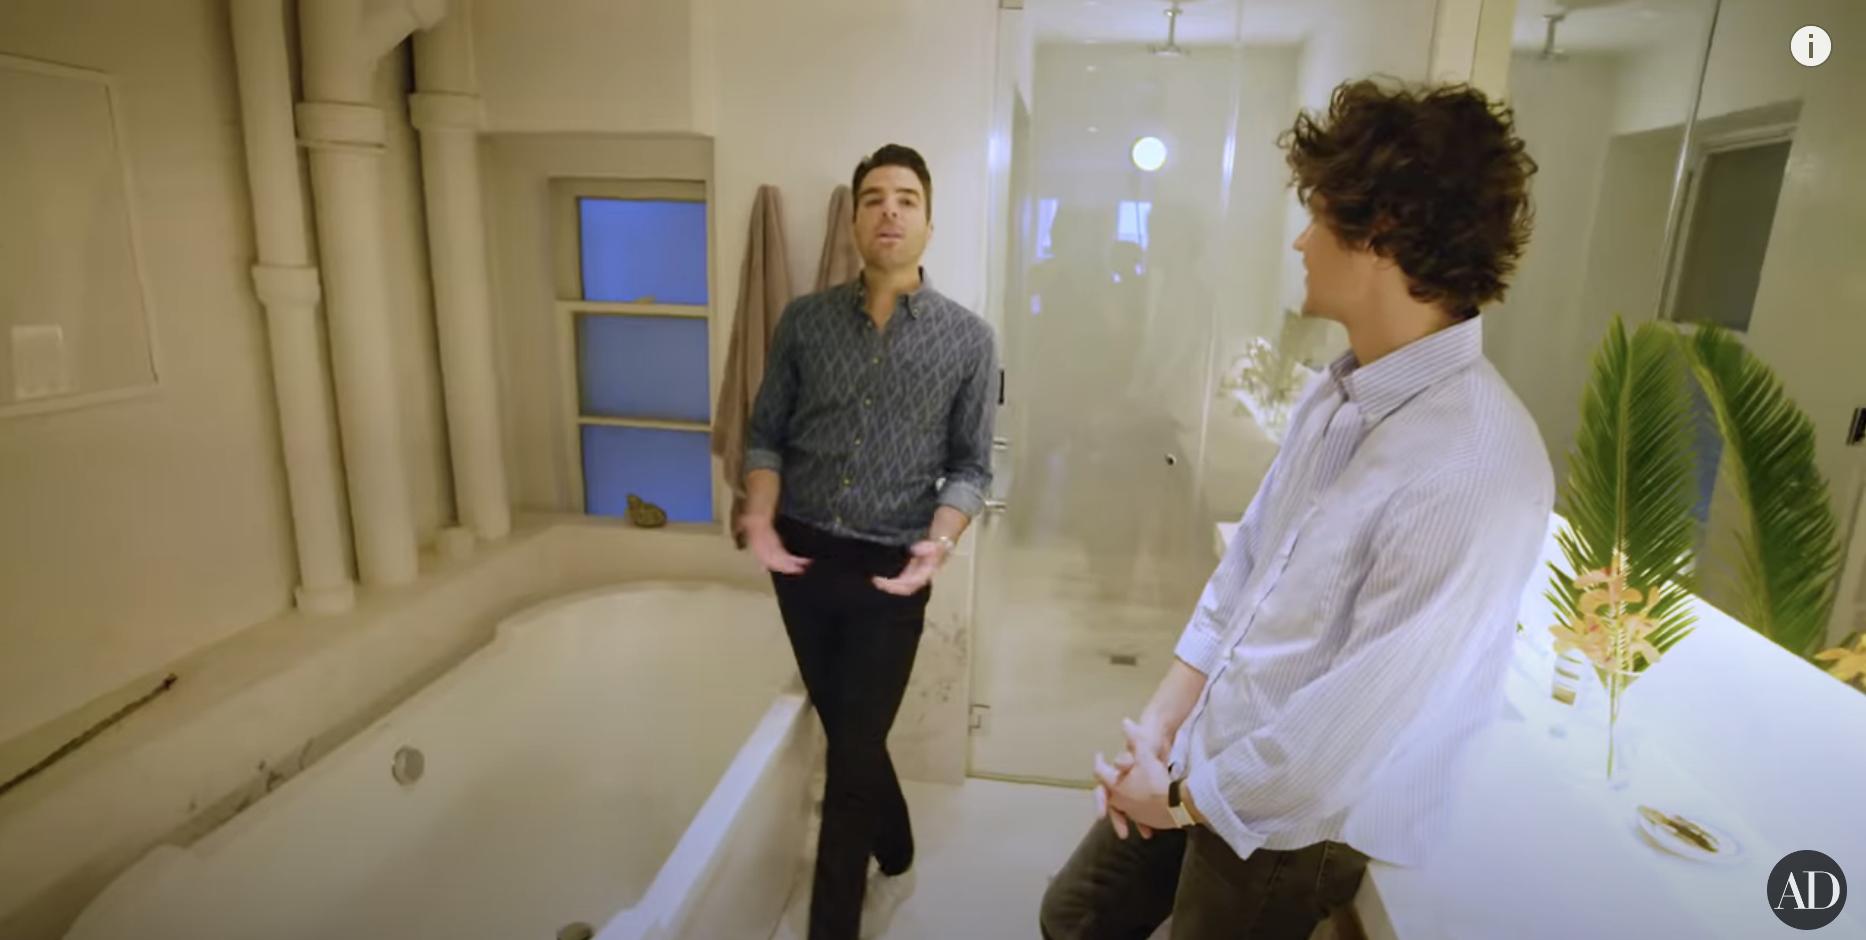 Zachary Quinto and his partner in their bathroom